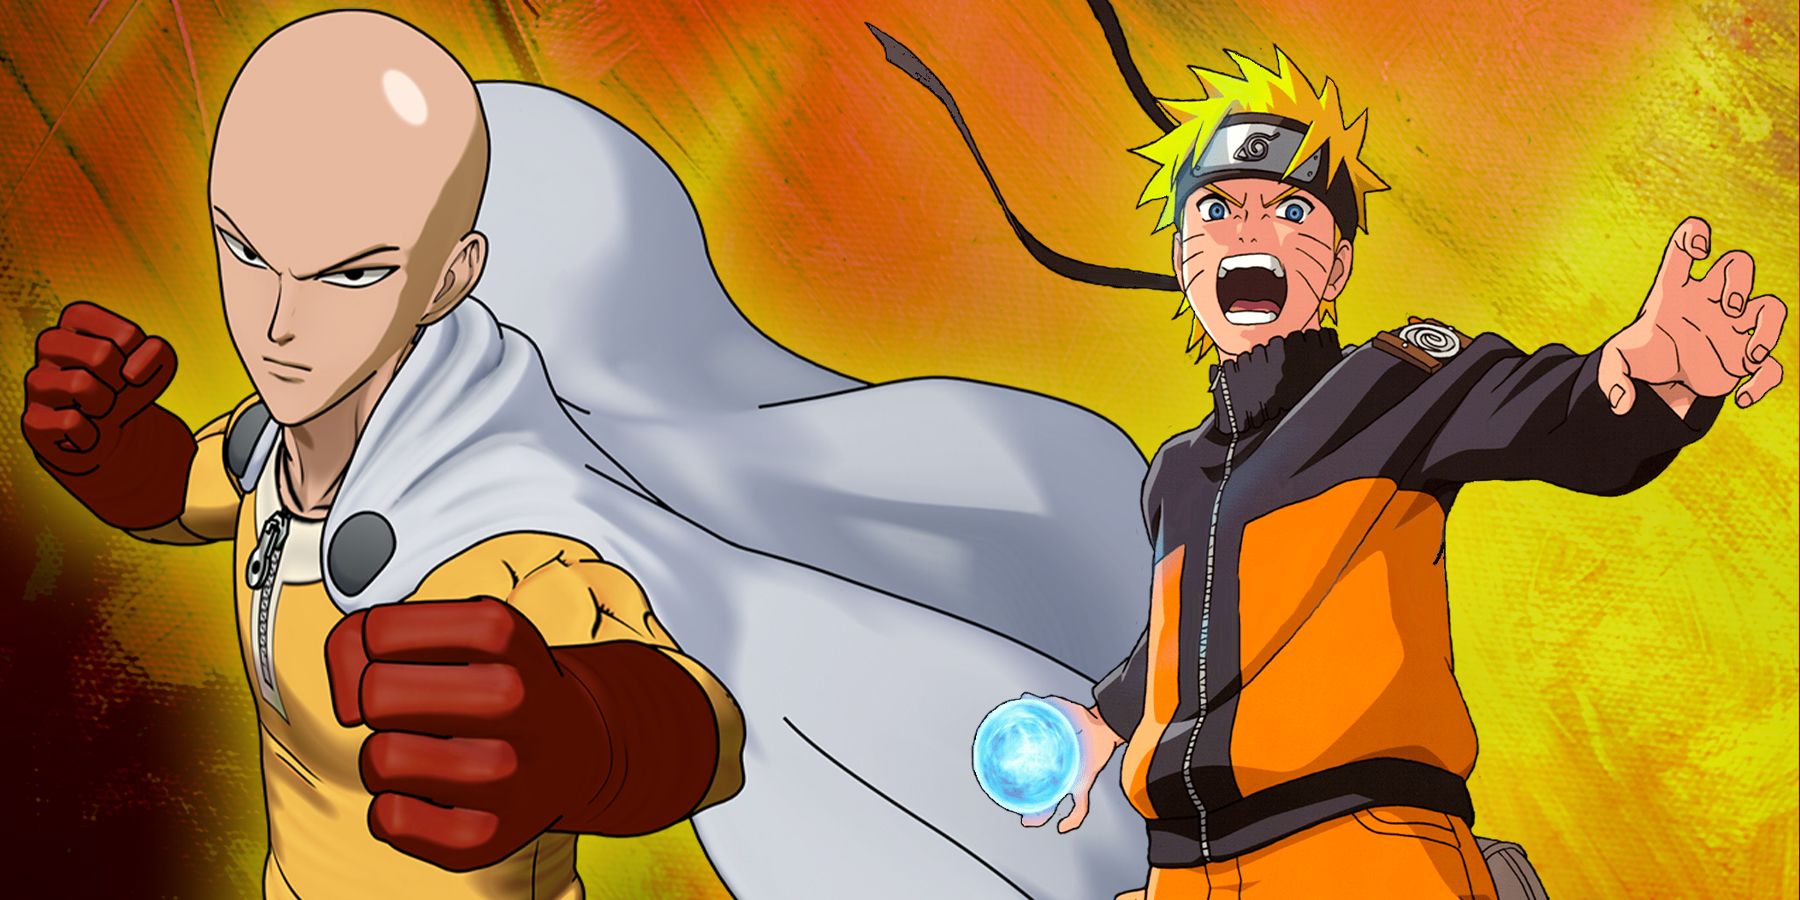 Saitama from one punch man and naruto preparing for battle